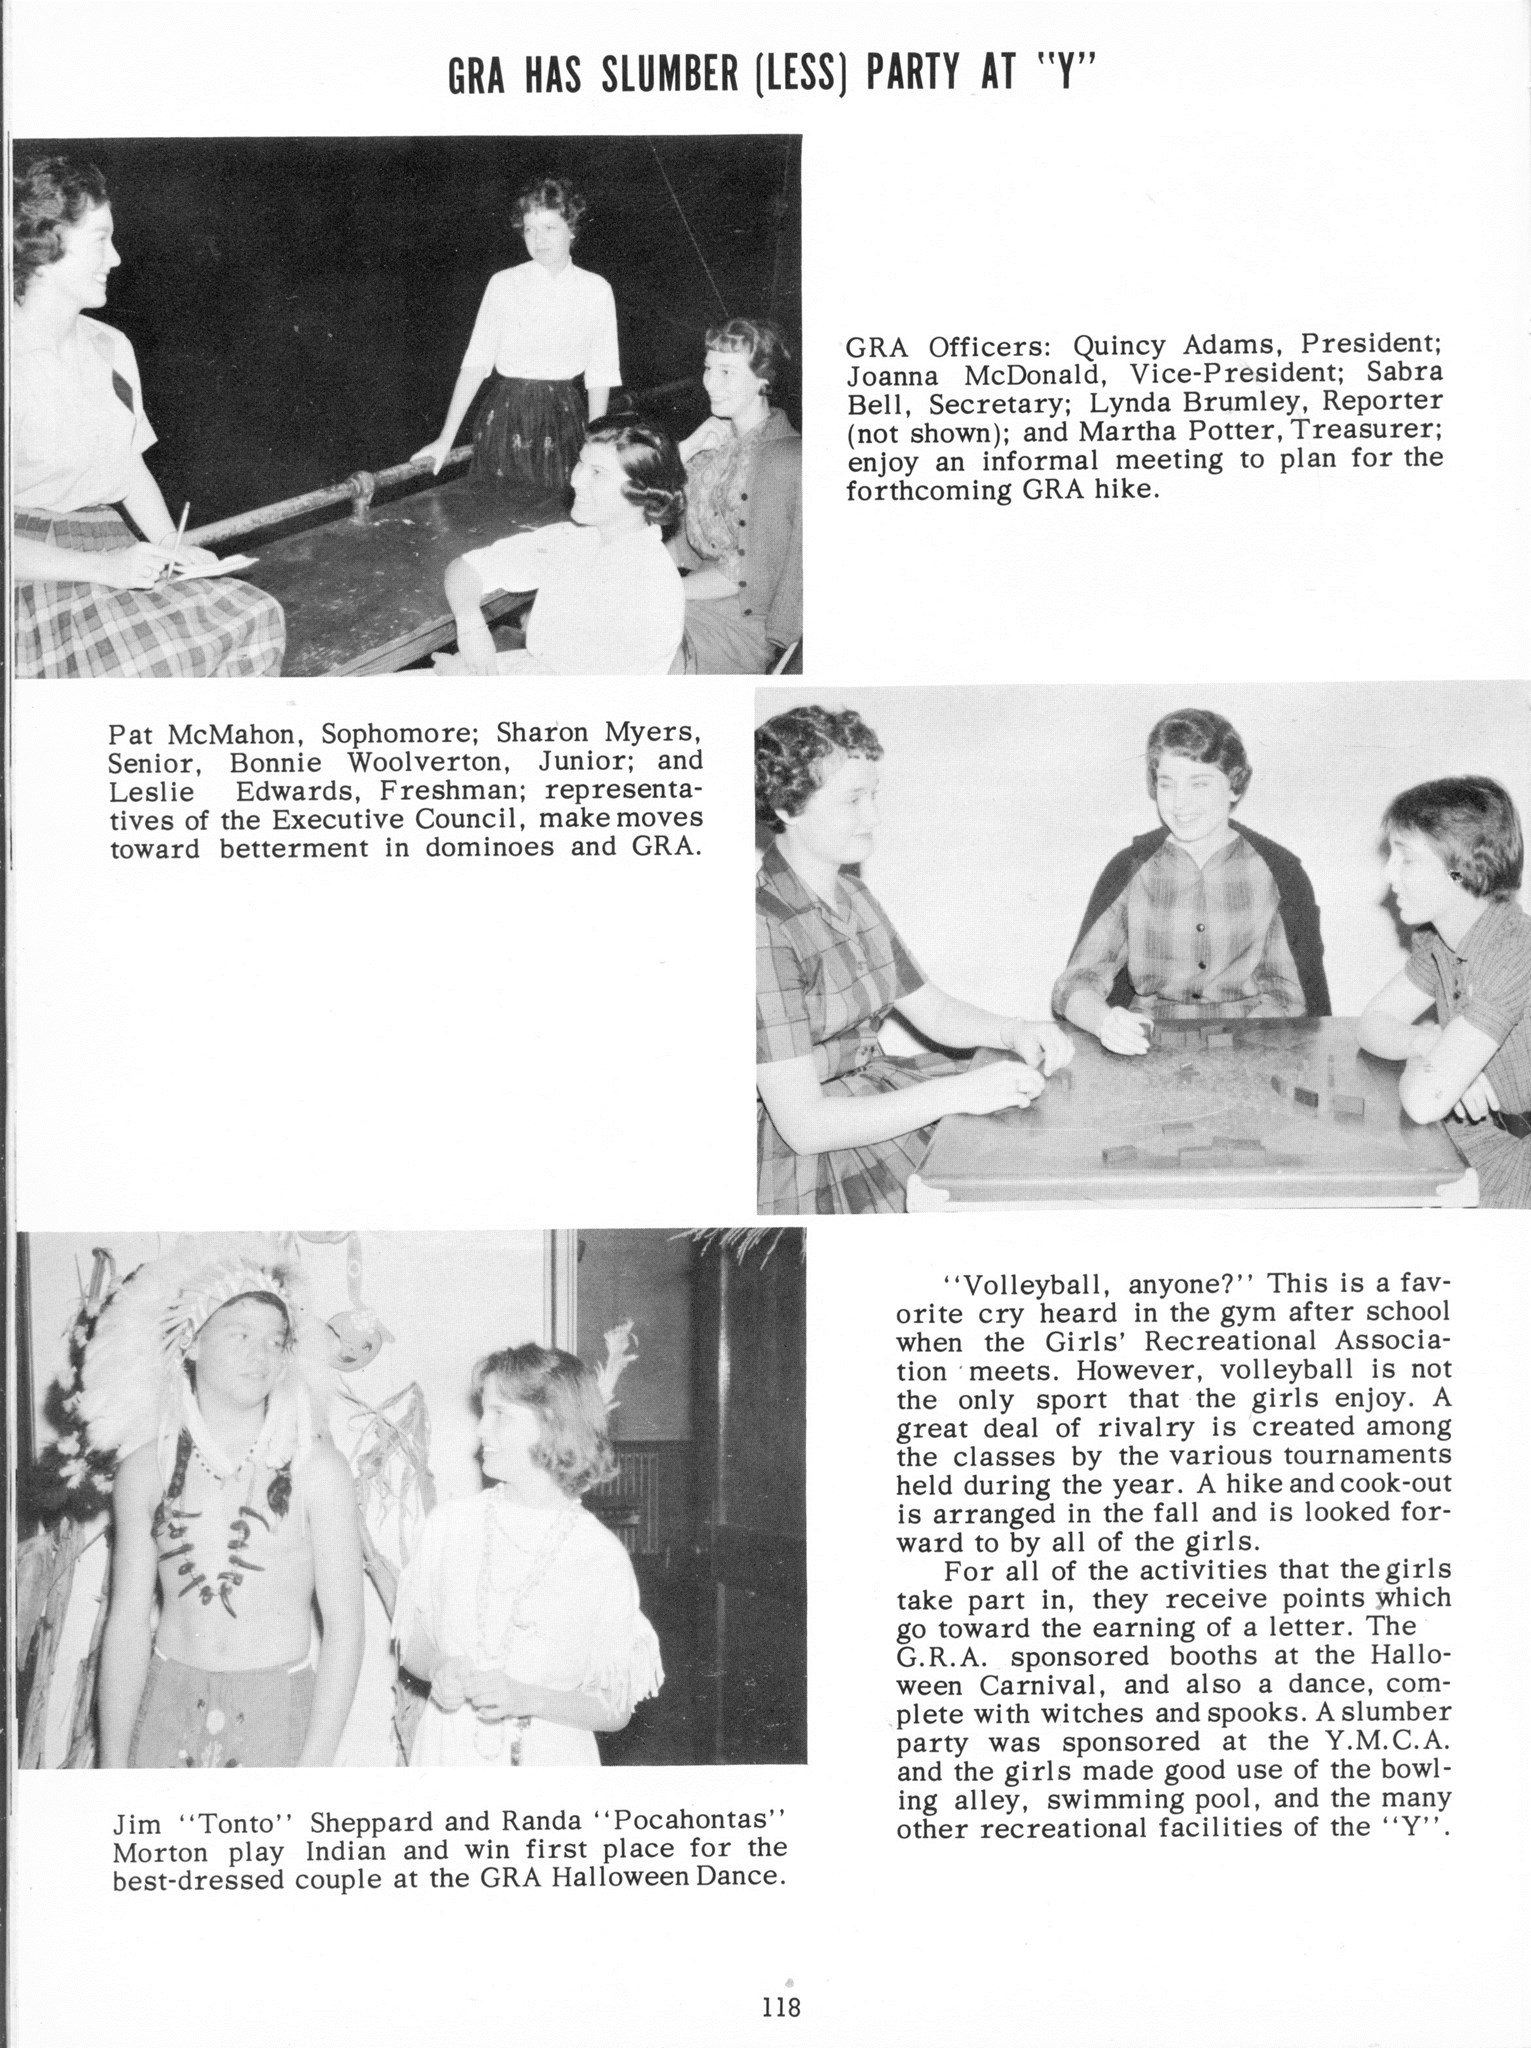 ../../../Images/Large/1960/Arclight-1960-pg0118.jpg